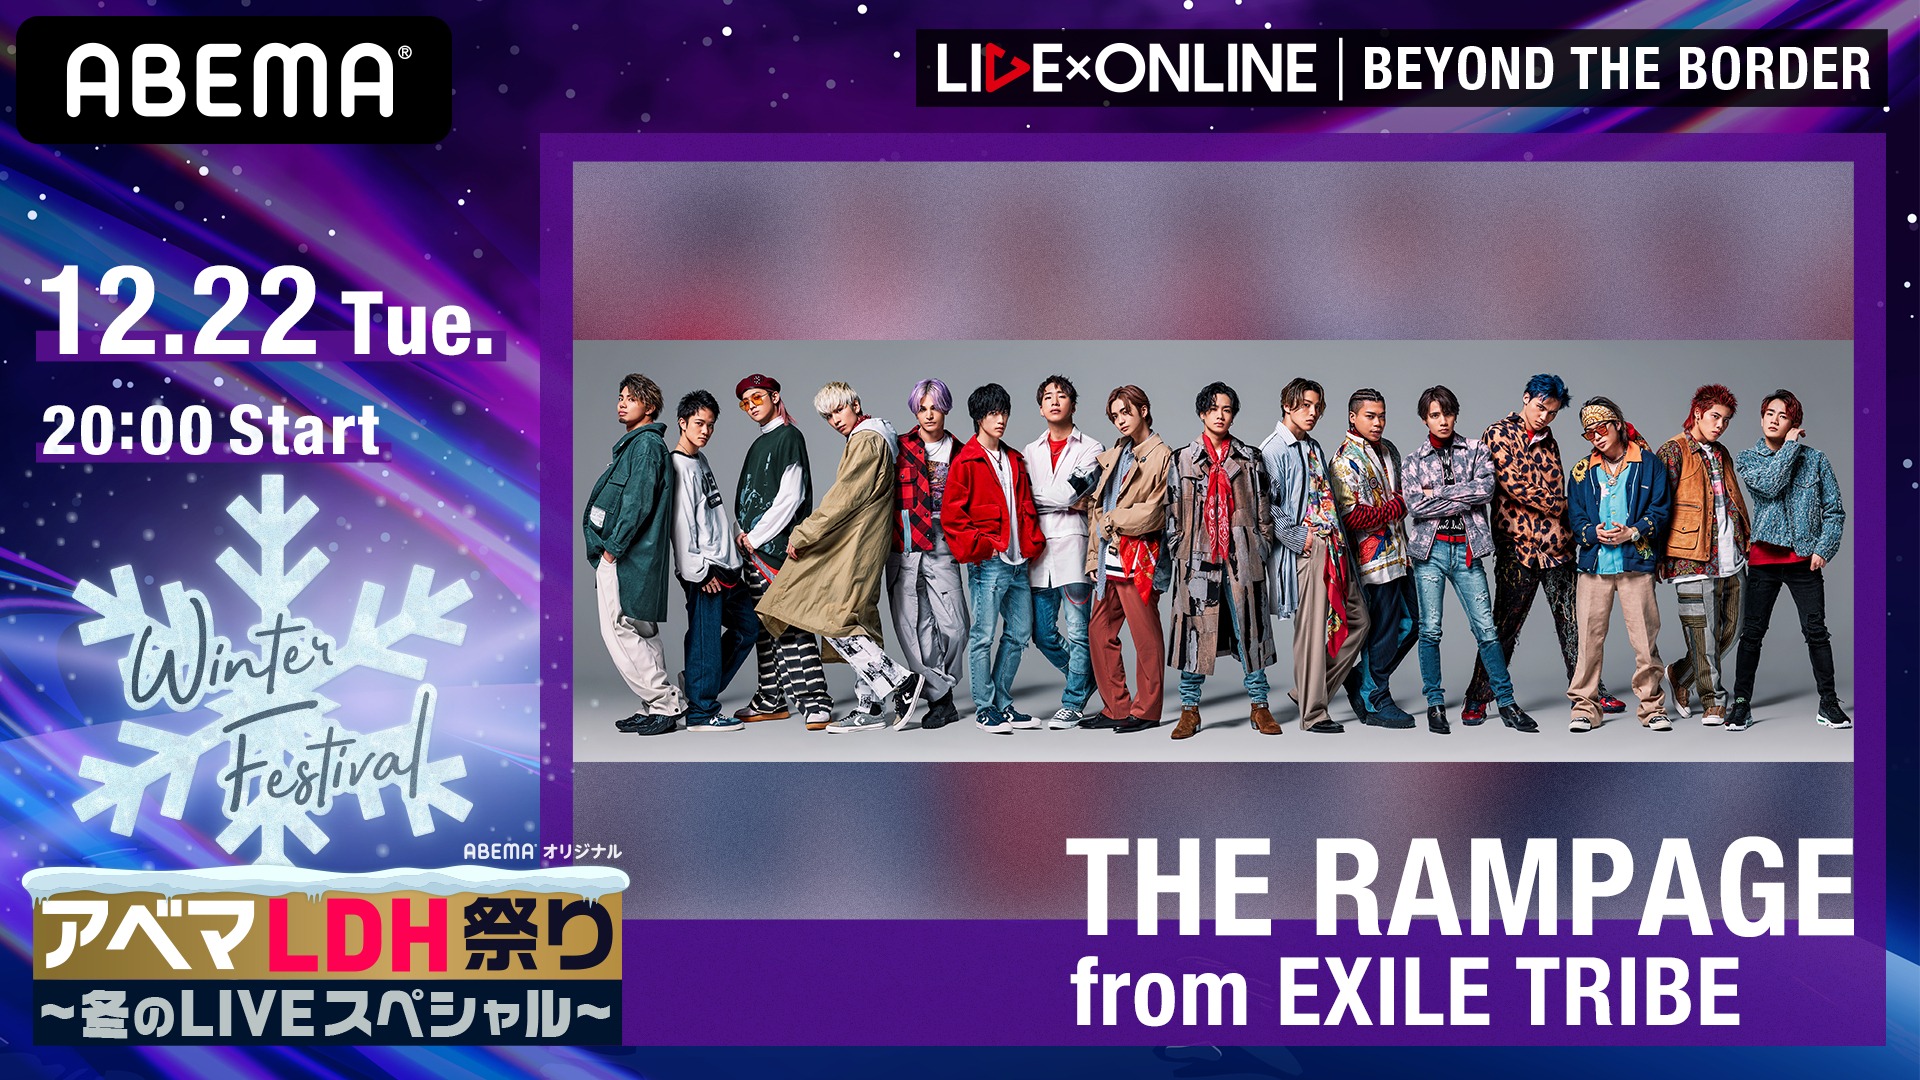 Live Online Beyond The Border The Rampage Exile Tribe Wiki Fandom